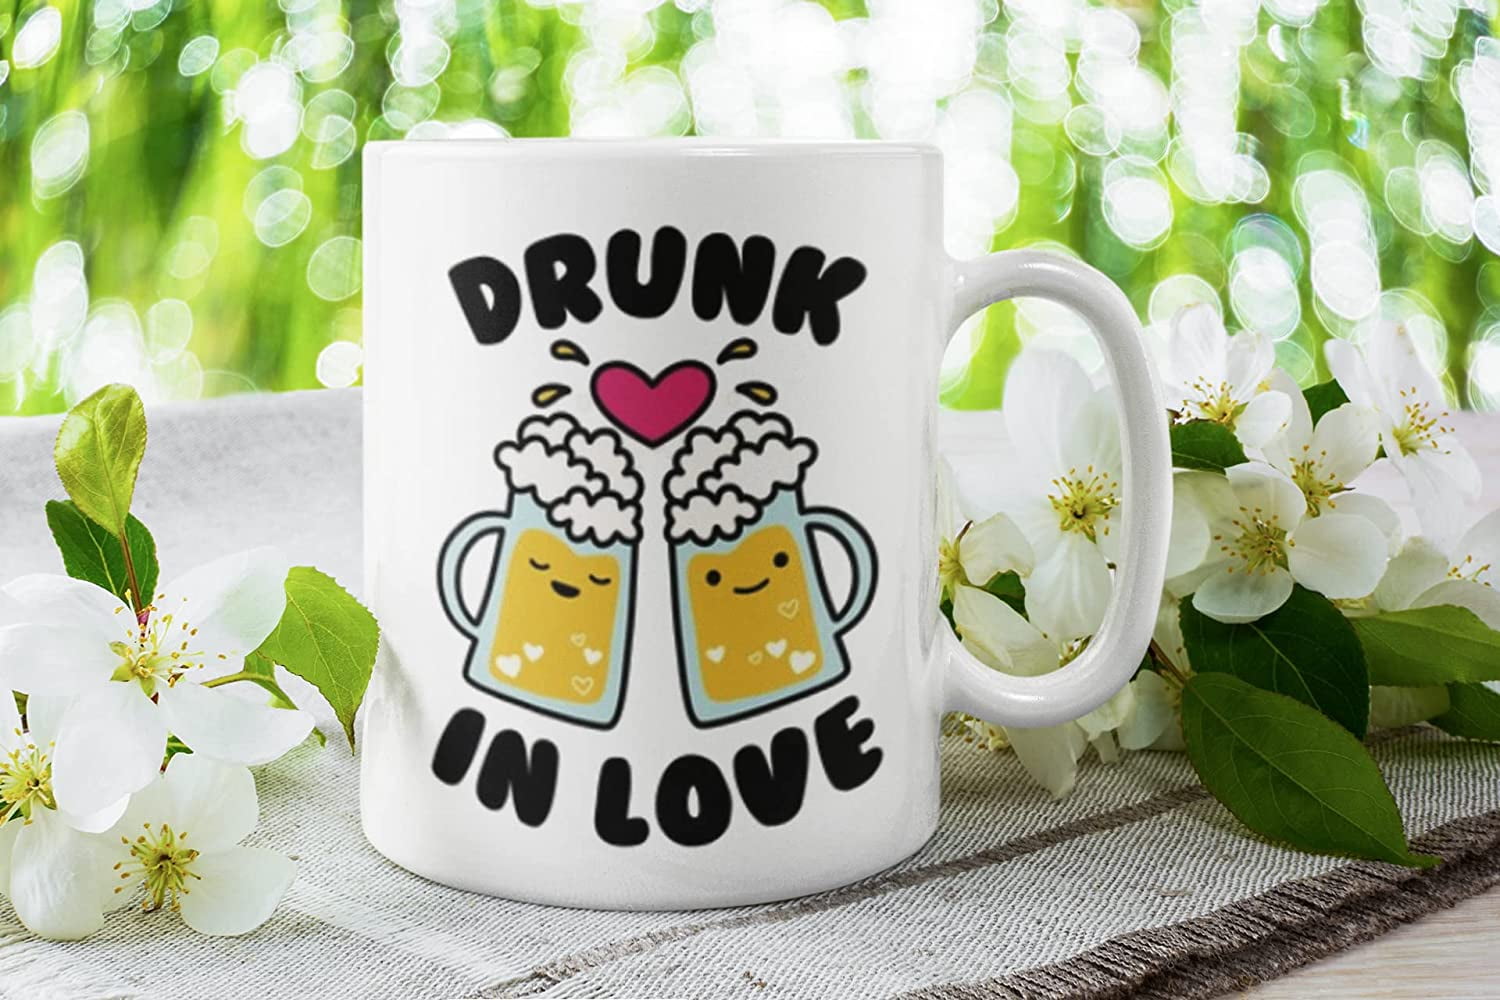 I'M So Glad We Got Drunk And Had Sex Mug Two-Tone Coffee Cup Funny Gif –  Cute But Rude